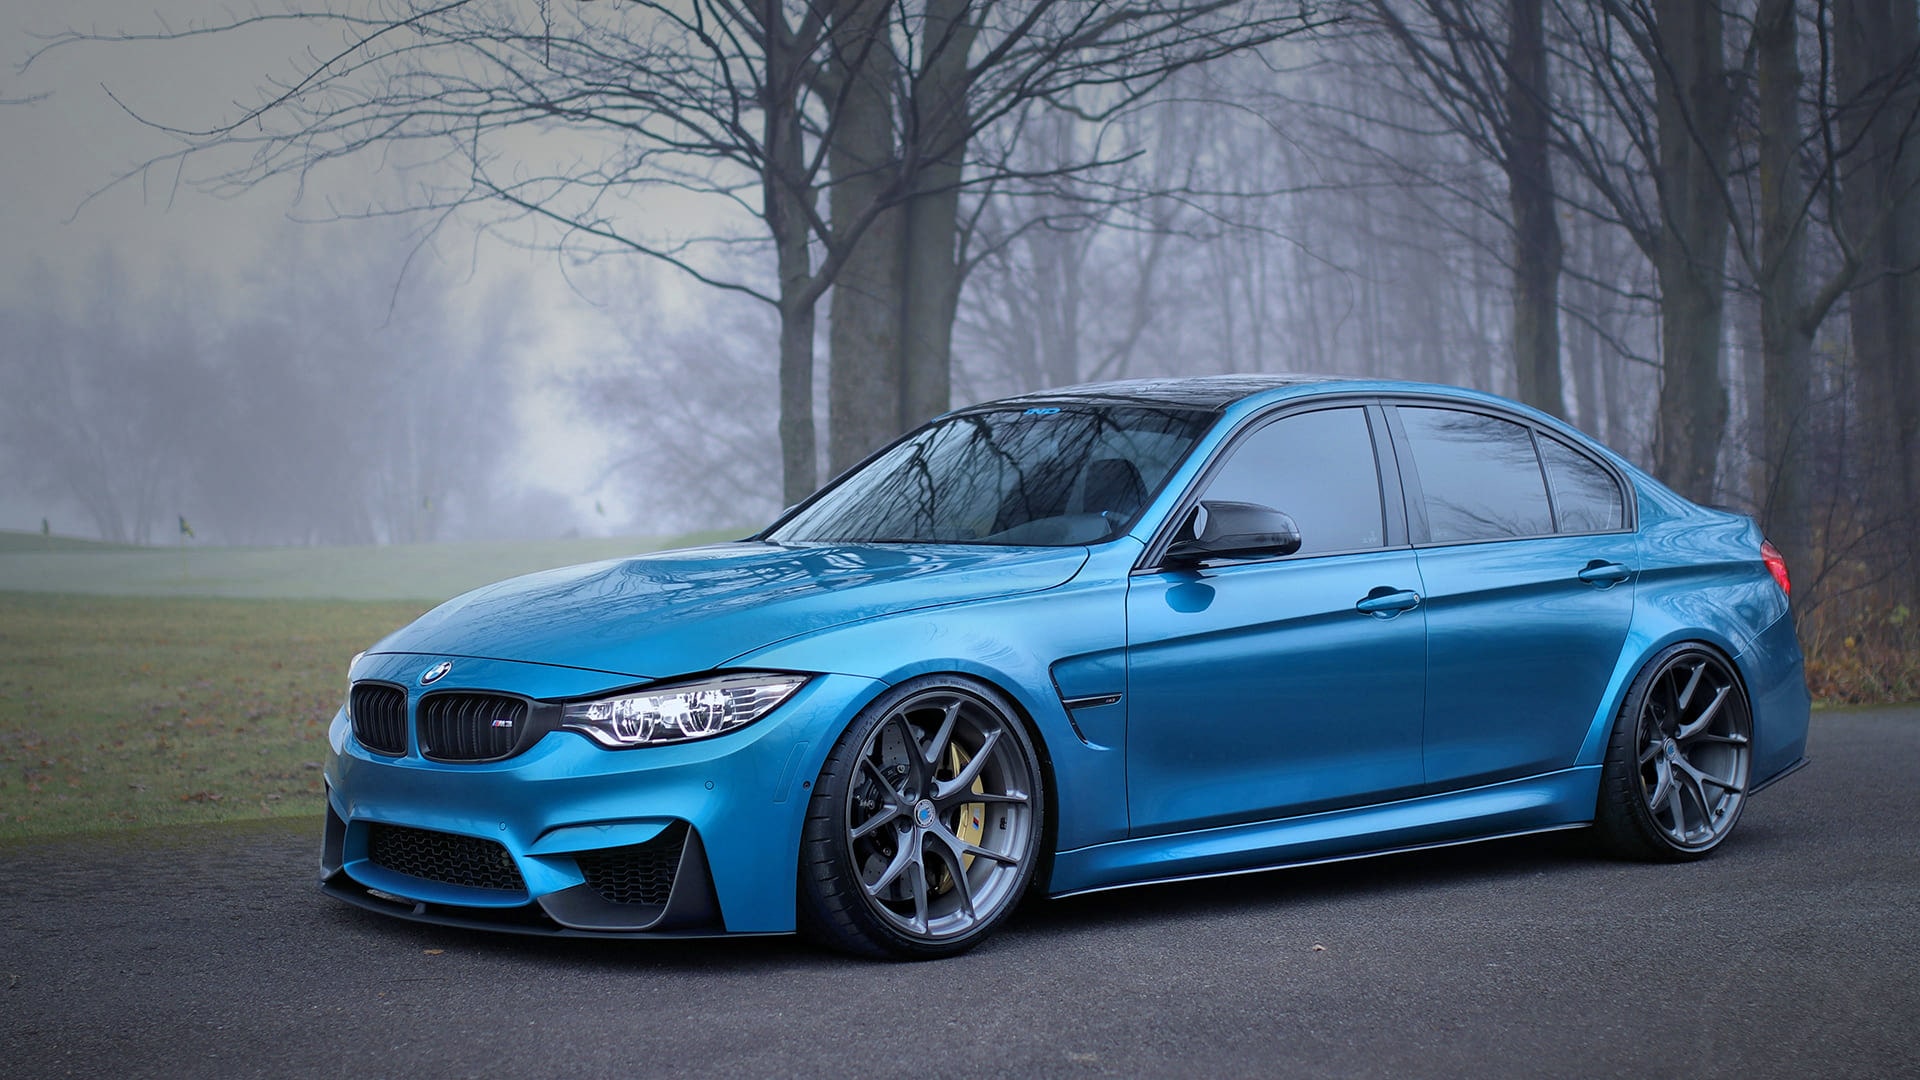 HD BMW M3 Wallpapers